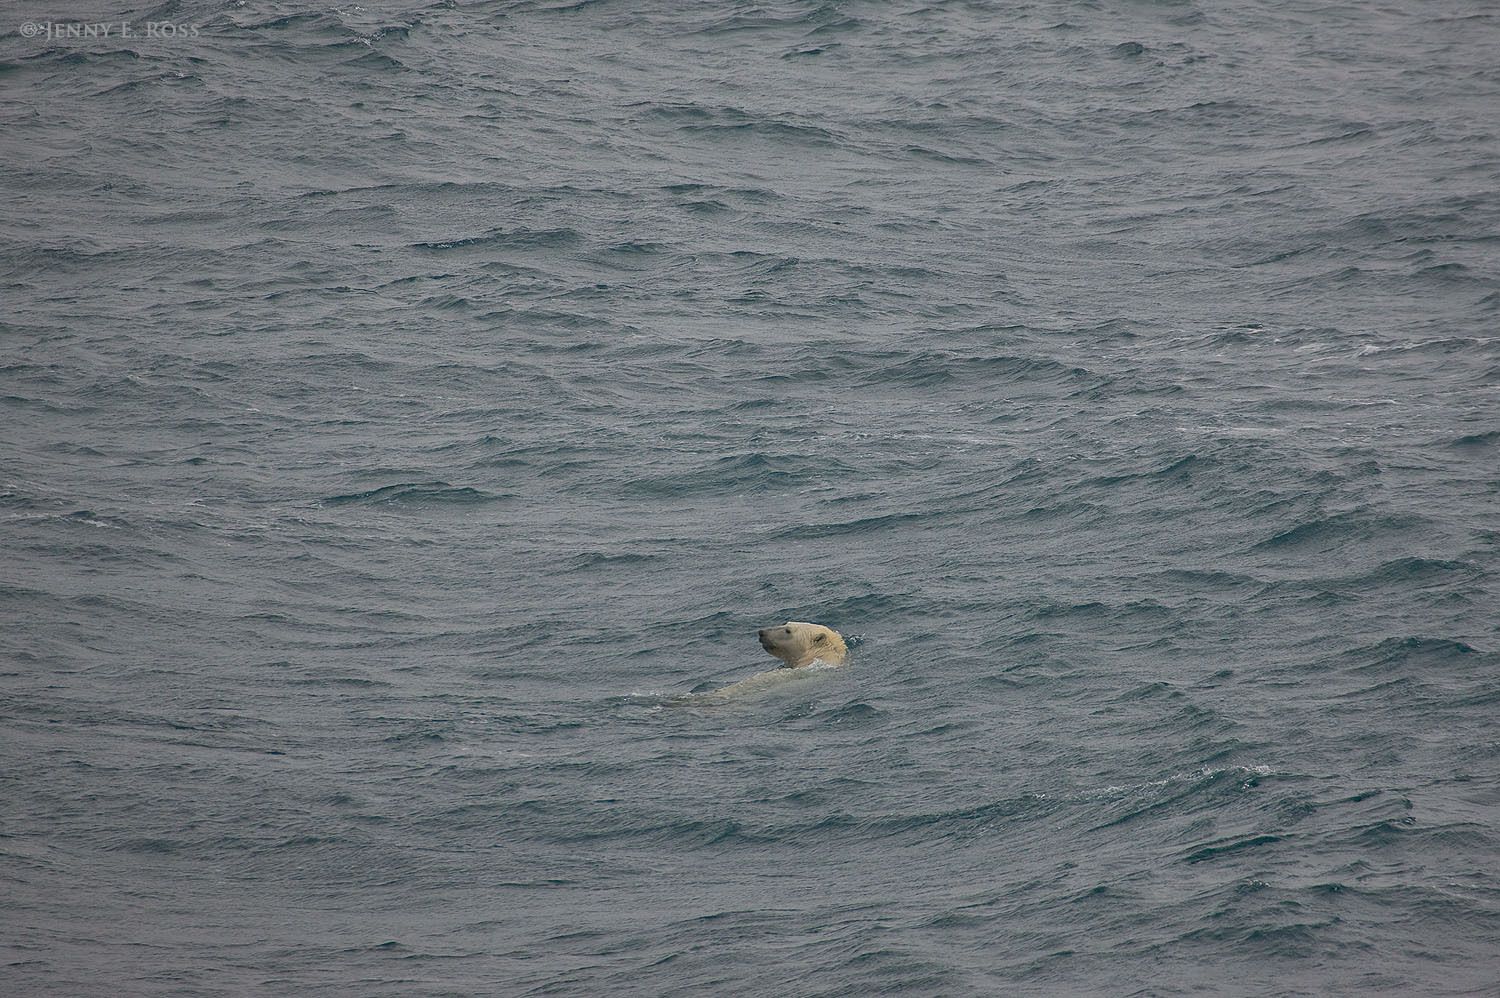 An adult female polar bear swimming in the Chukchi Sea, far from land and even farther from the nearest sea ice. The ice had melted and receded toward the central polar basin, hundreds of kilometers away.